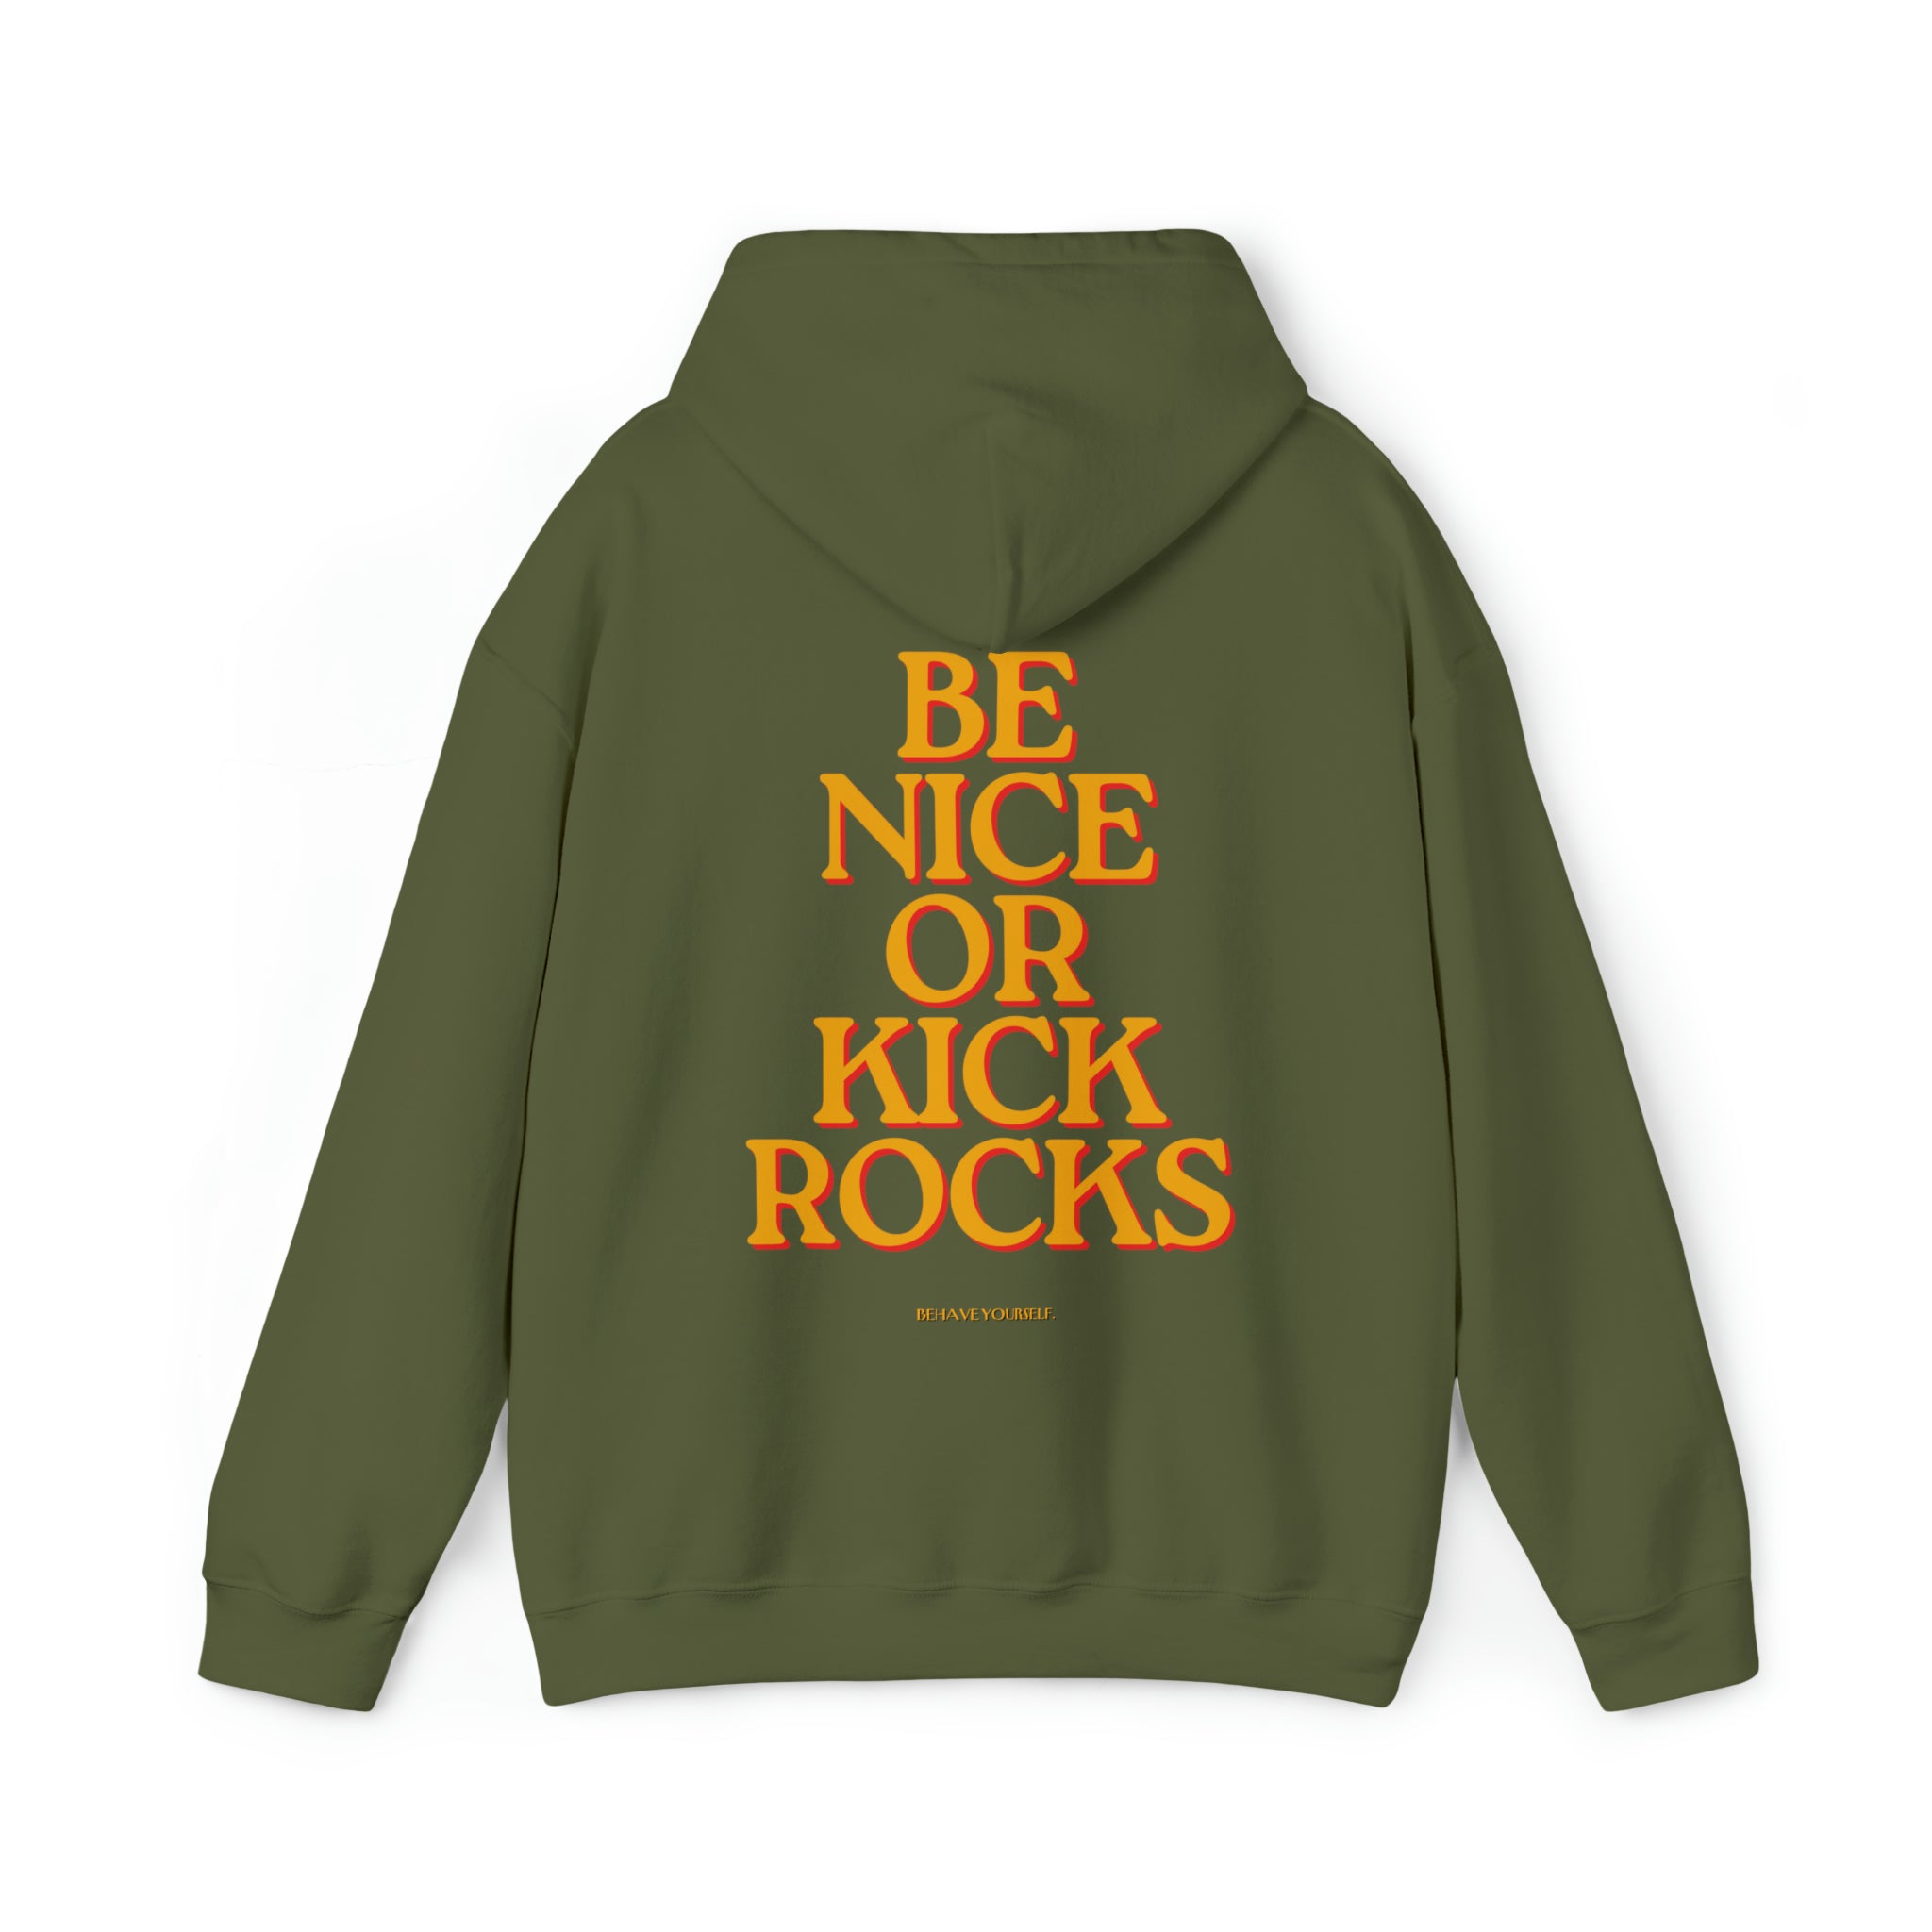 Be nice quote Hoodie for men and women available